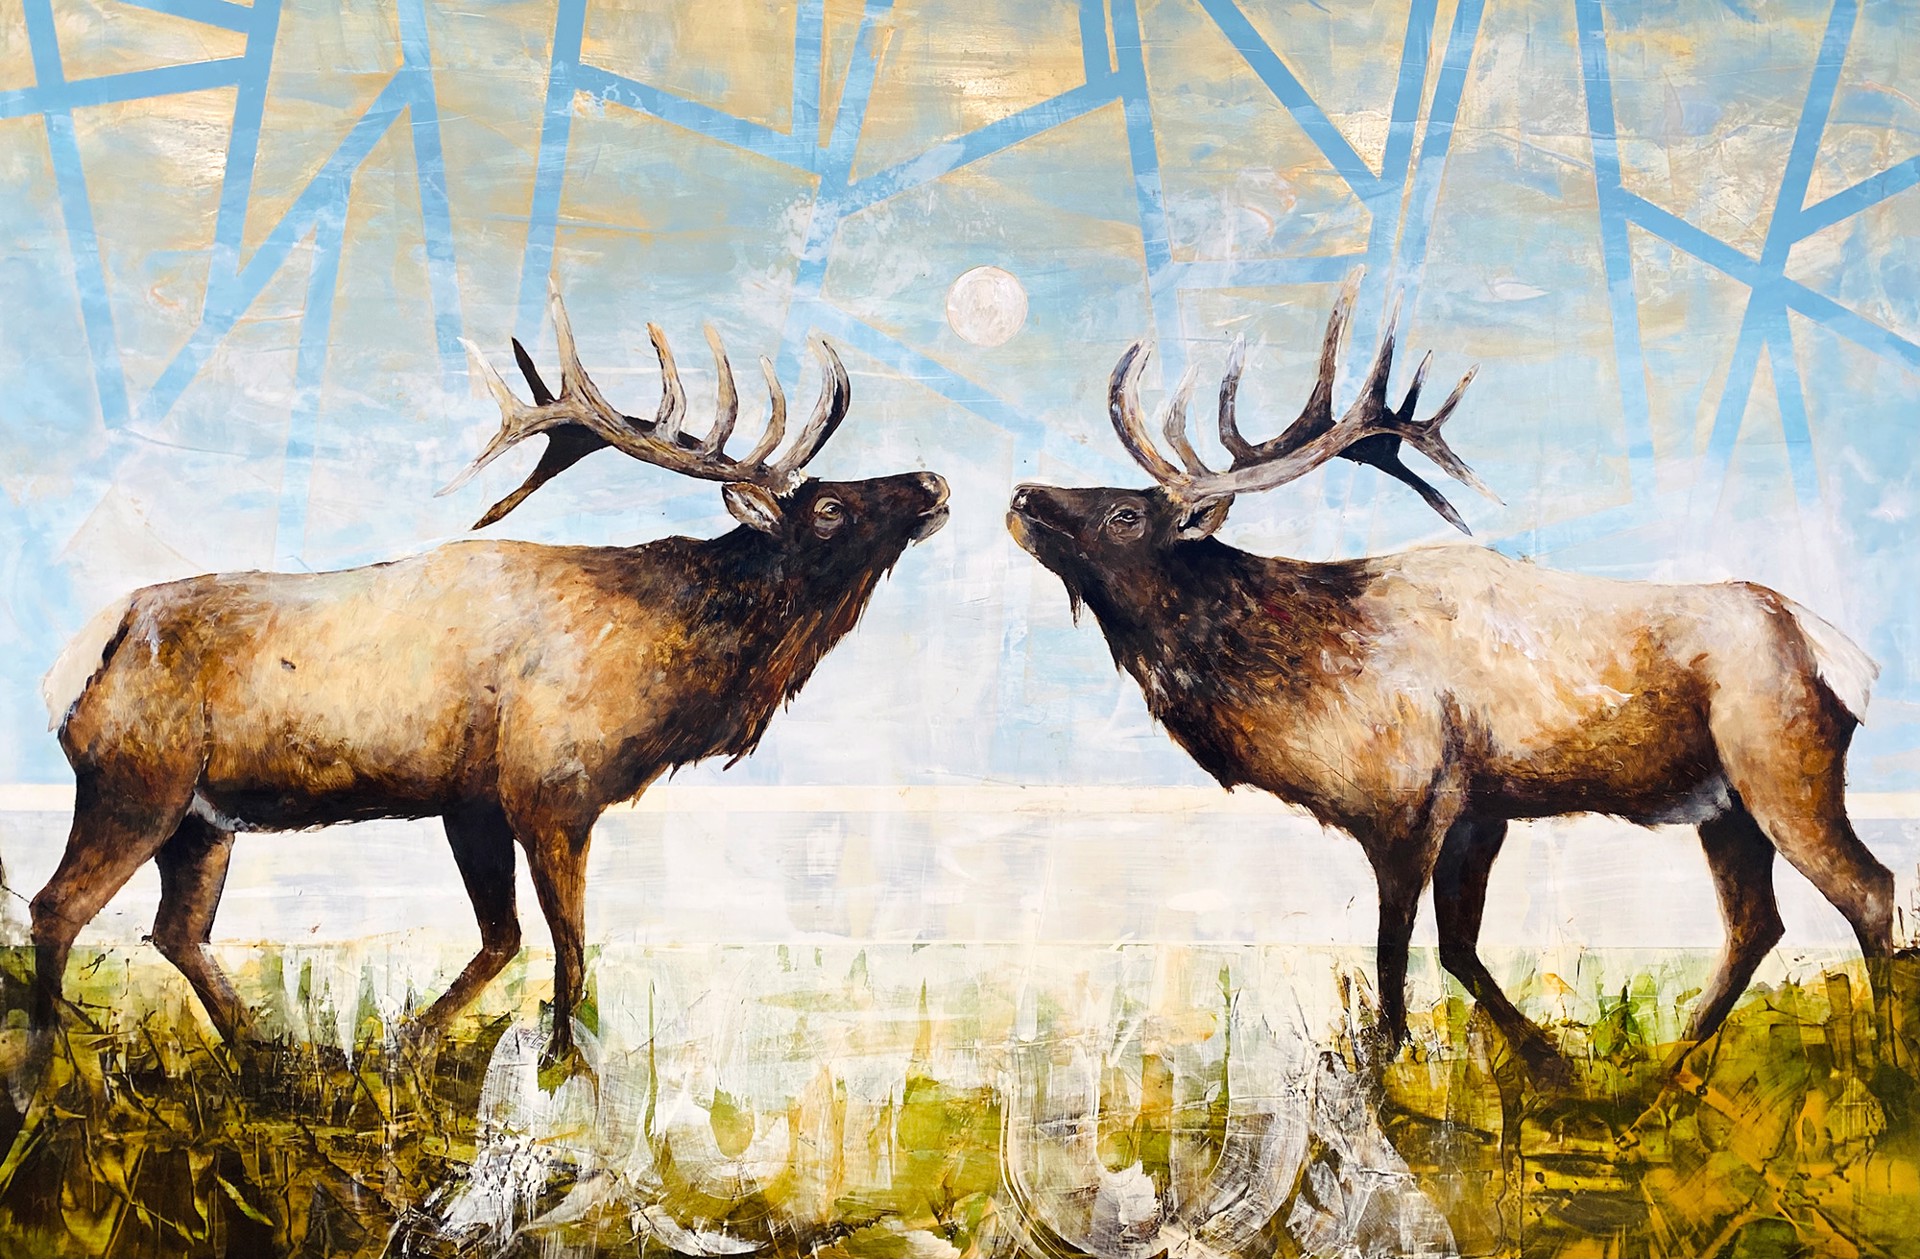 Original Oil Painting By Jenna Von Benedikt Of Two Elks On An Abstract Background